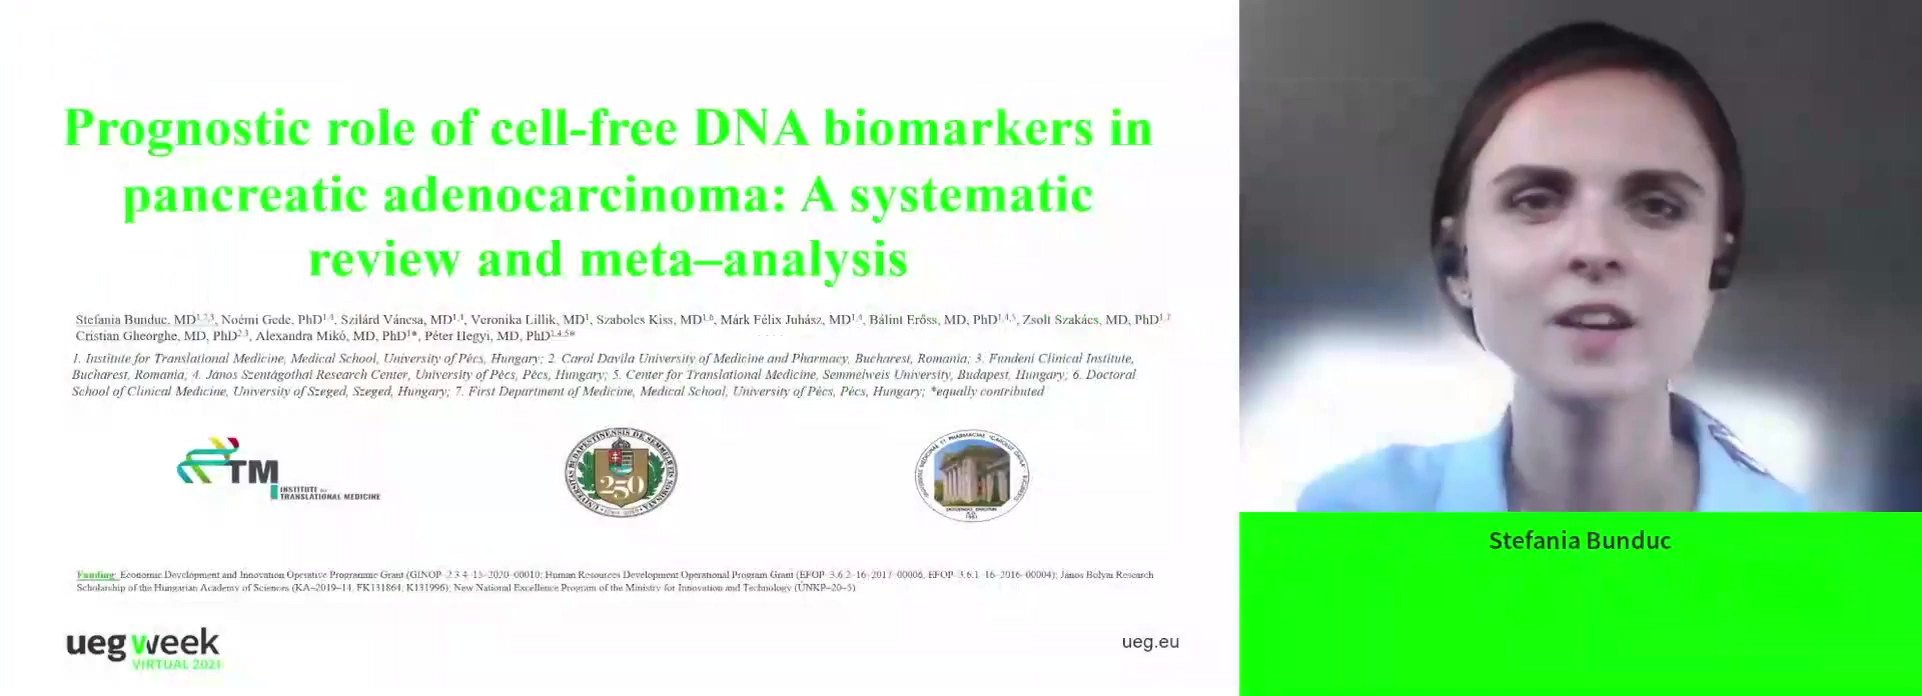 CELL-FREE DNA BIOMARKERS PREDICT OVERALL AND PROGRESSION-FREE SURVIVAL IN PANCREATIC ADENOCARCINOMA – A SYSTEMATIC REVIEW AND META-ANALYSIS